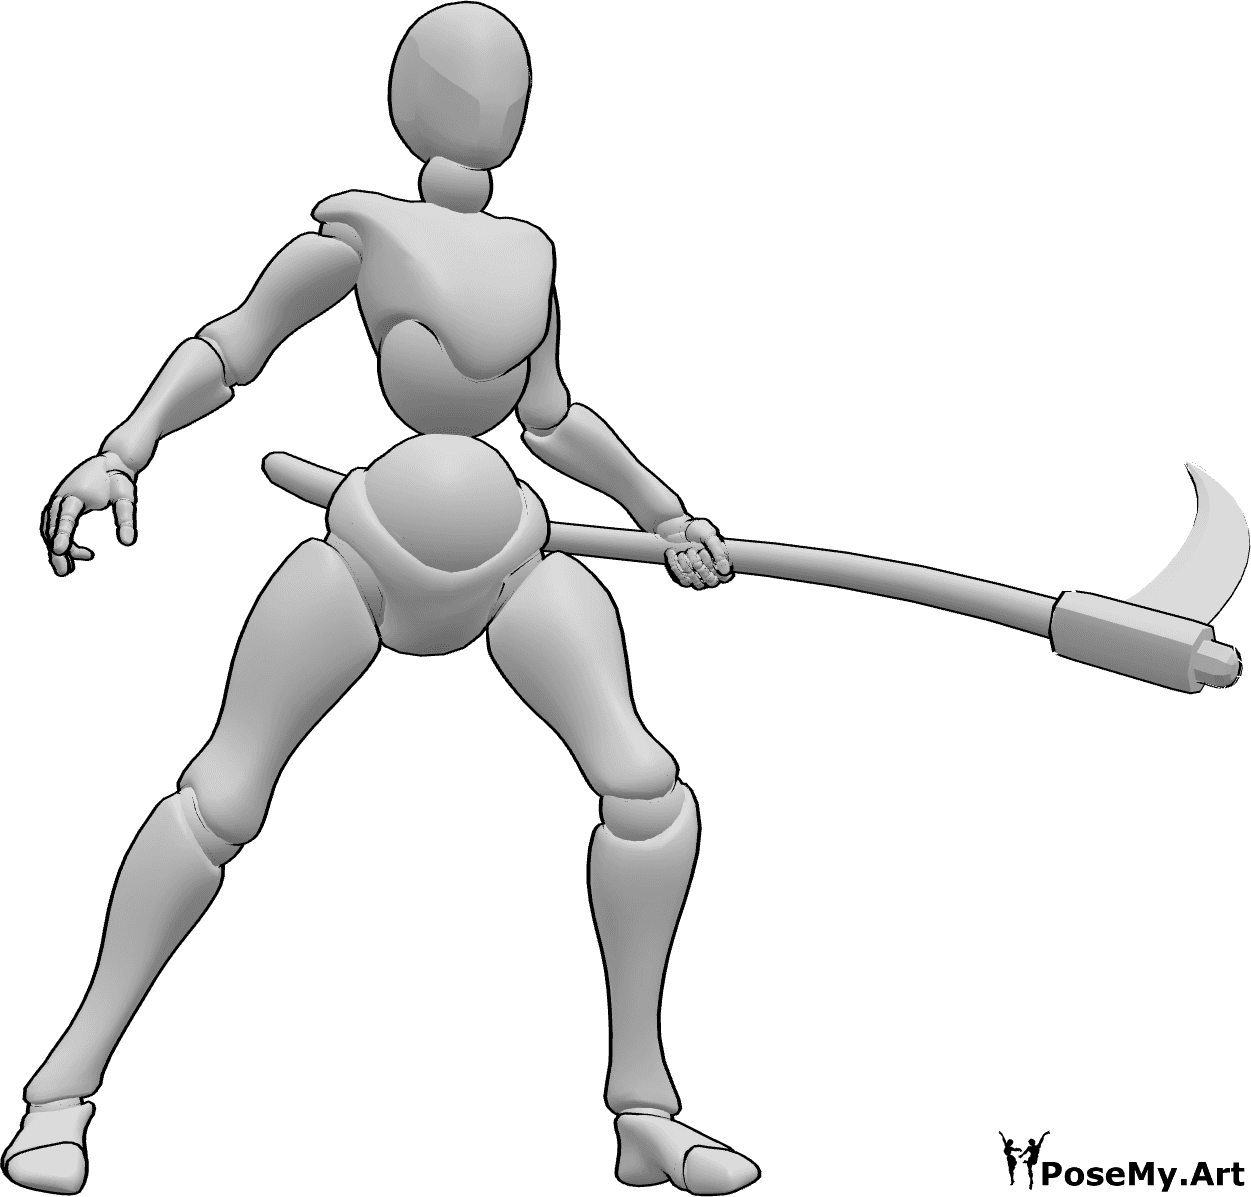 Pose Reference - Female fighter scythe pose - Female is standing with a scythe in her left hand, ready to fight